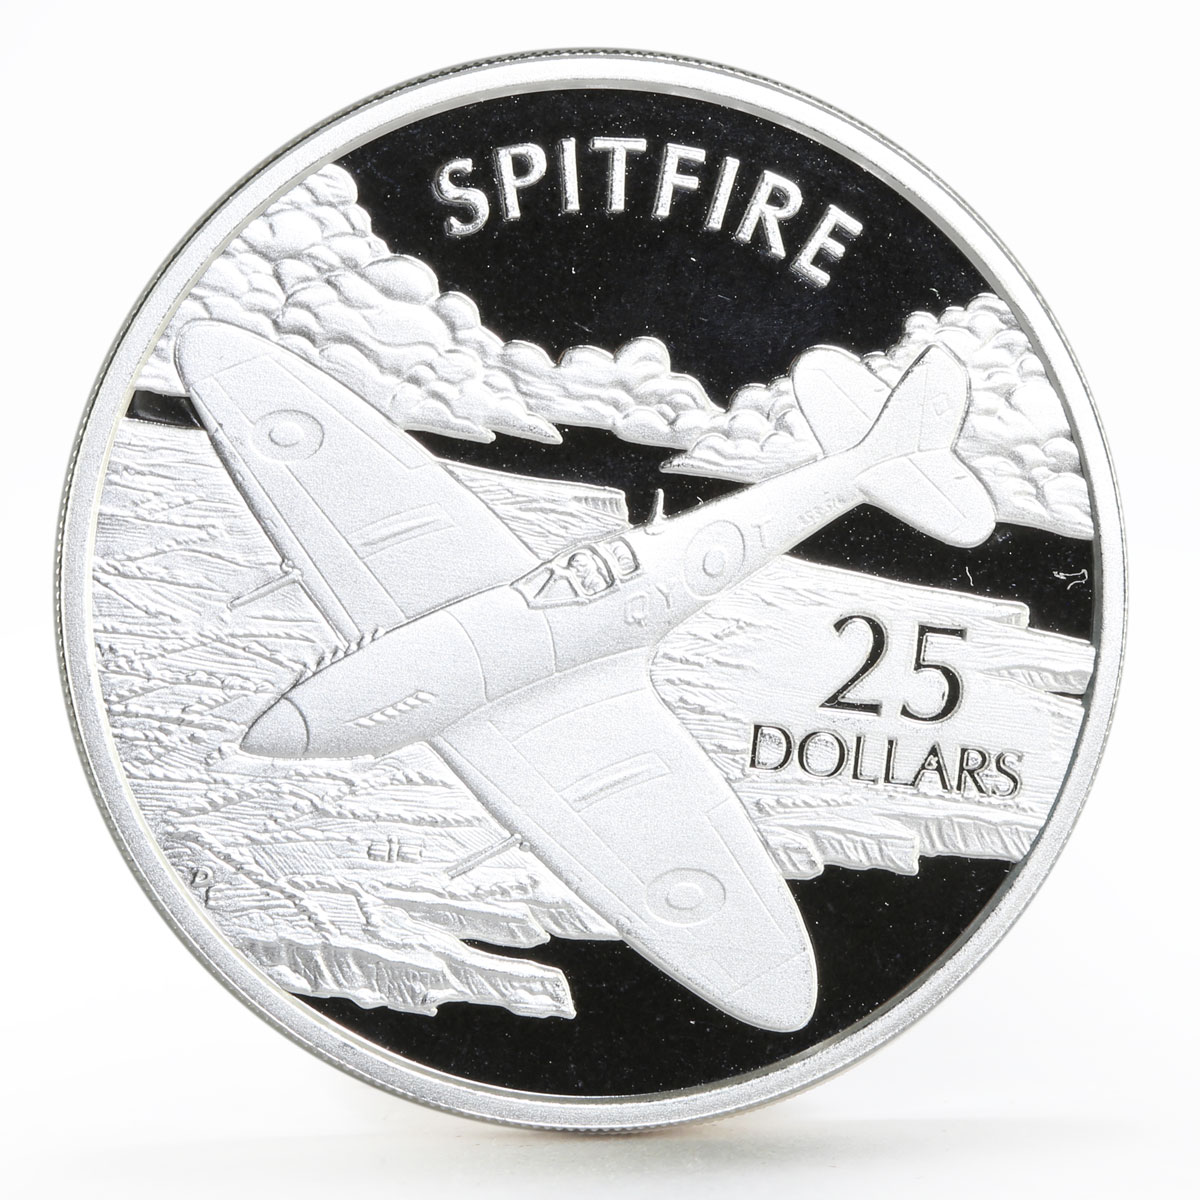 Solomon Islands 25 dollars Aircraft series Spitfire Plane proof silver coin 2003